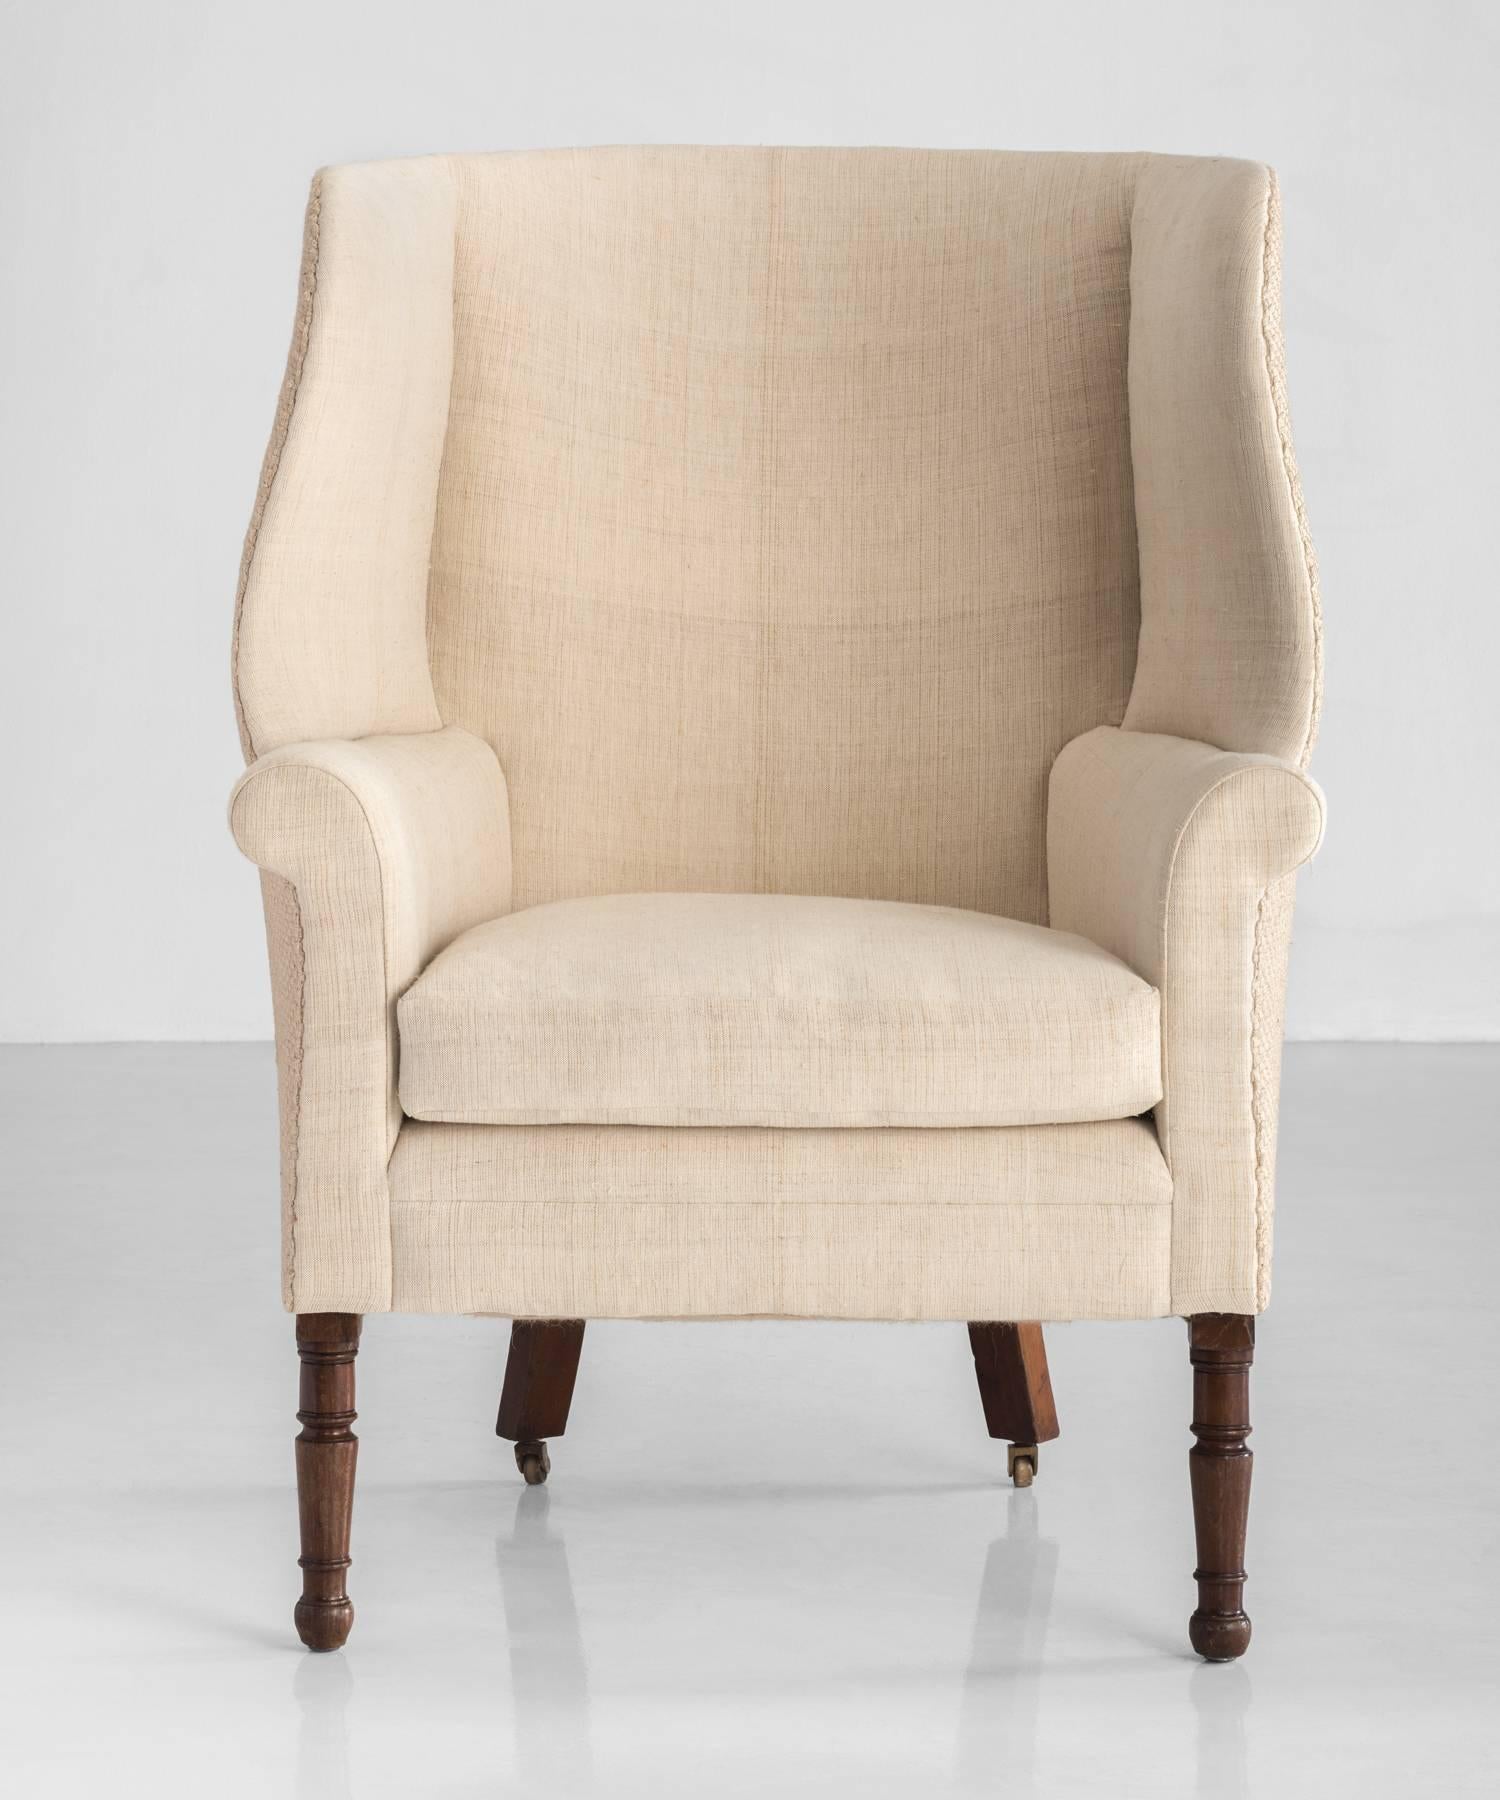 Regency Barrel back wing chair, circa 1830.

Newly reupholstered with linen interiors and burlap exterior, on turned legs.